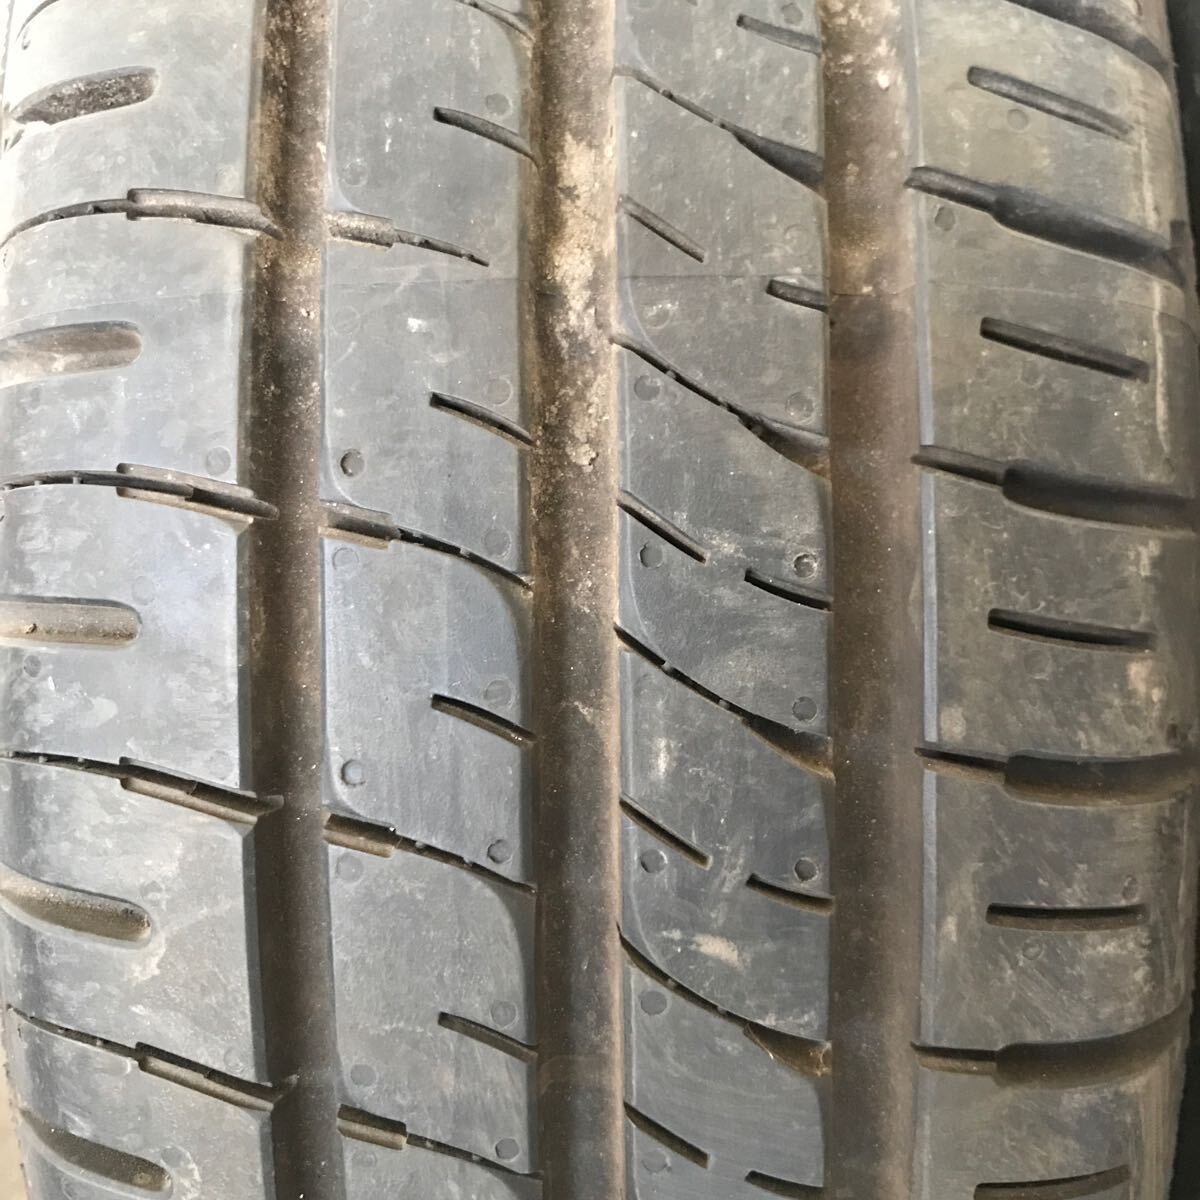 DUNLOP ENASAVE EC204 155/65R13 73S finest quality burr mountain 4ps.@ price C-512 Fukuoka * taking over warm welcome *22 year made *99%* prompt decision service goods *